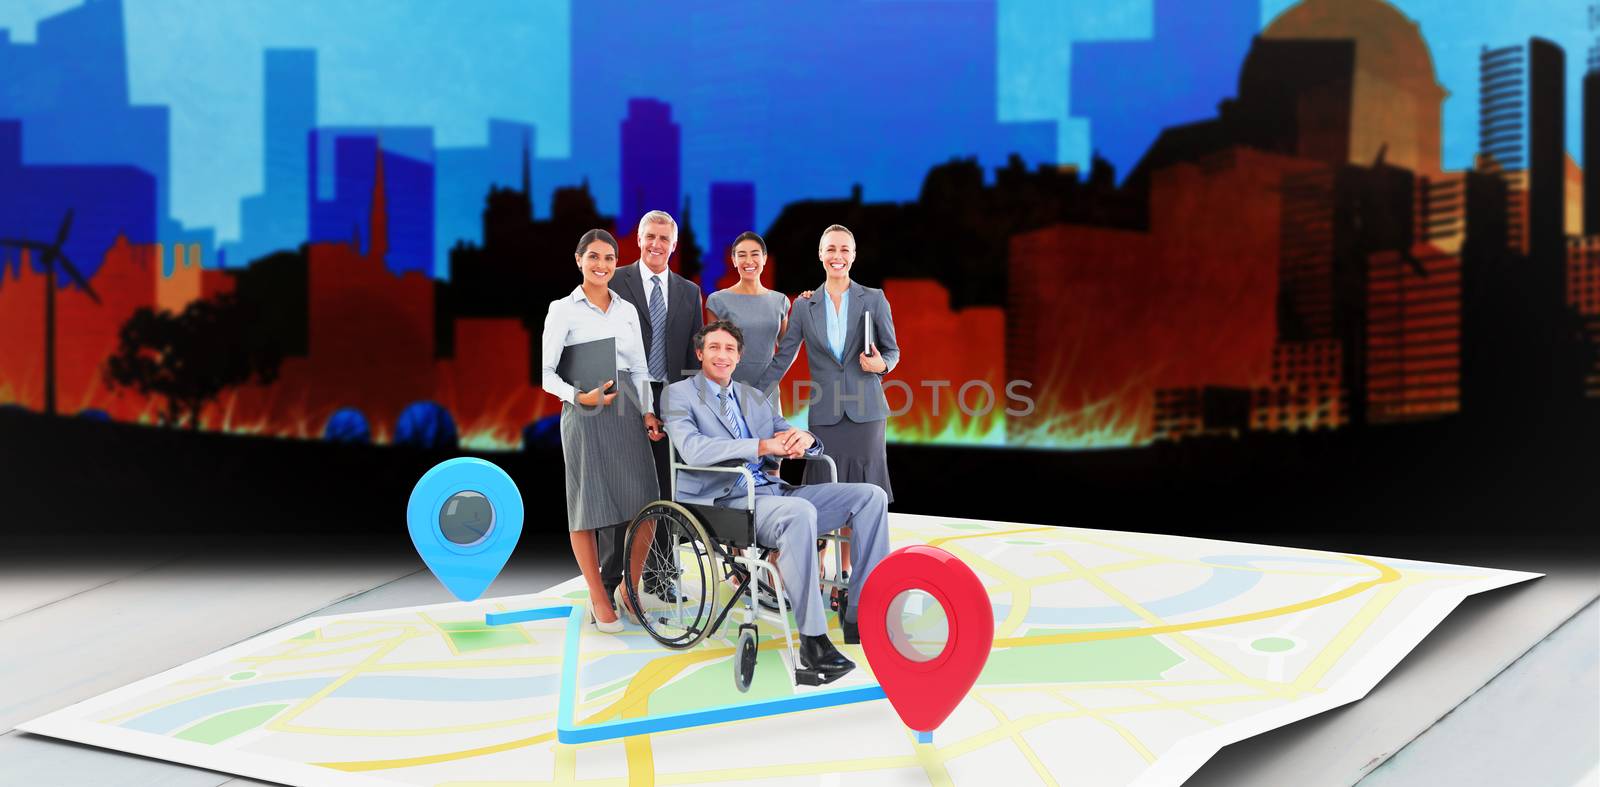 Disabled businessman with his colleagues smiling at camera against artistic cityscape design